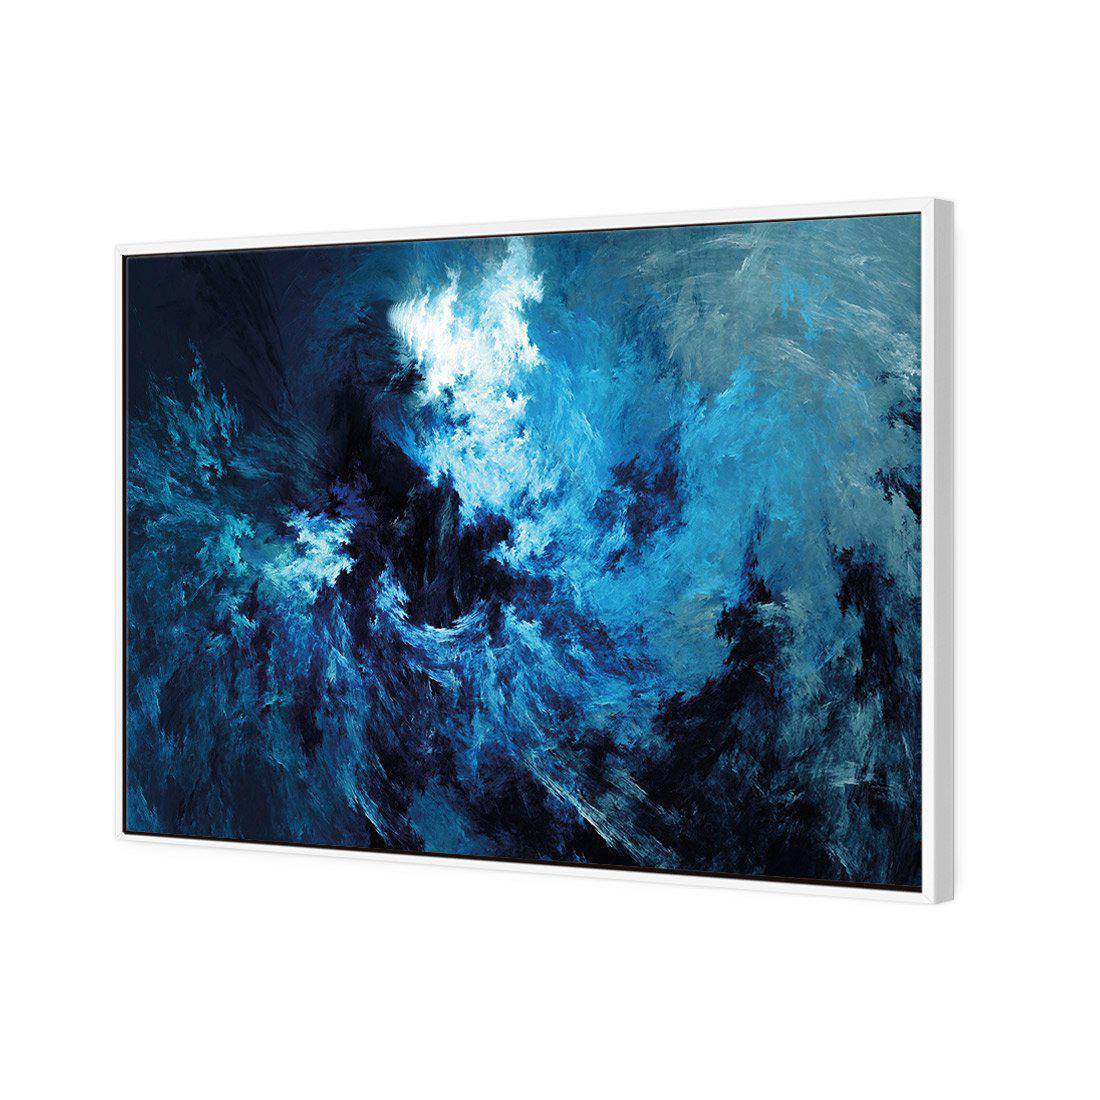 Into the Storm Canvas Art-Canvas-Wall Art Designs-45x30cm-Canvas - White Frame-Wall Art Designs